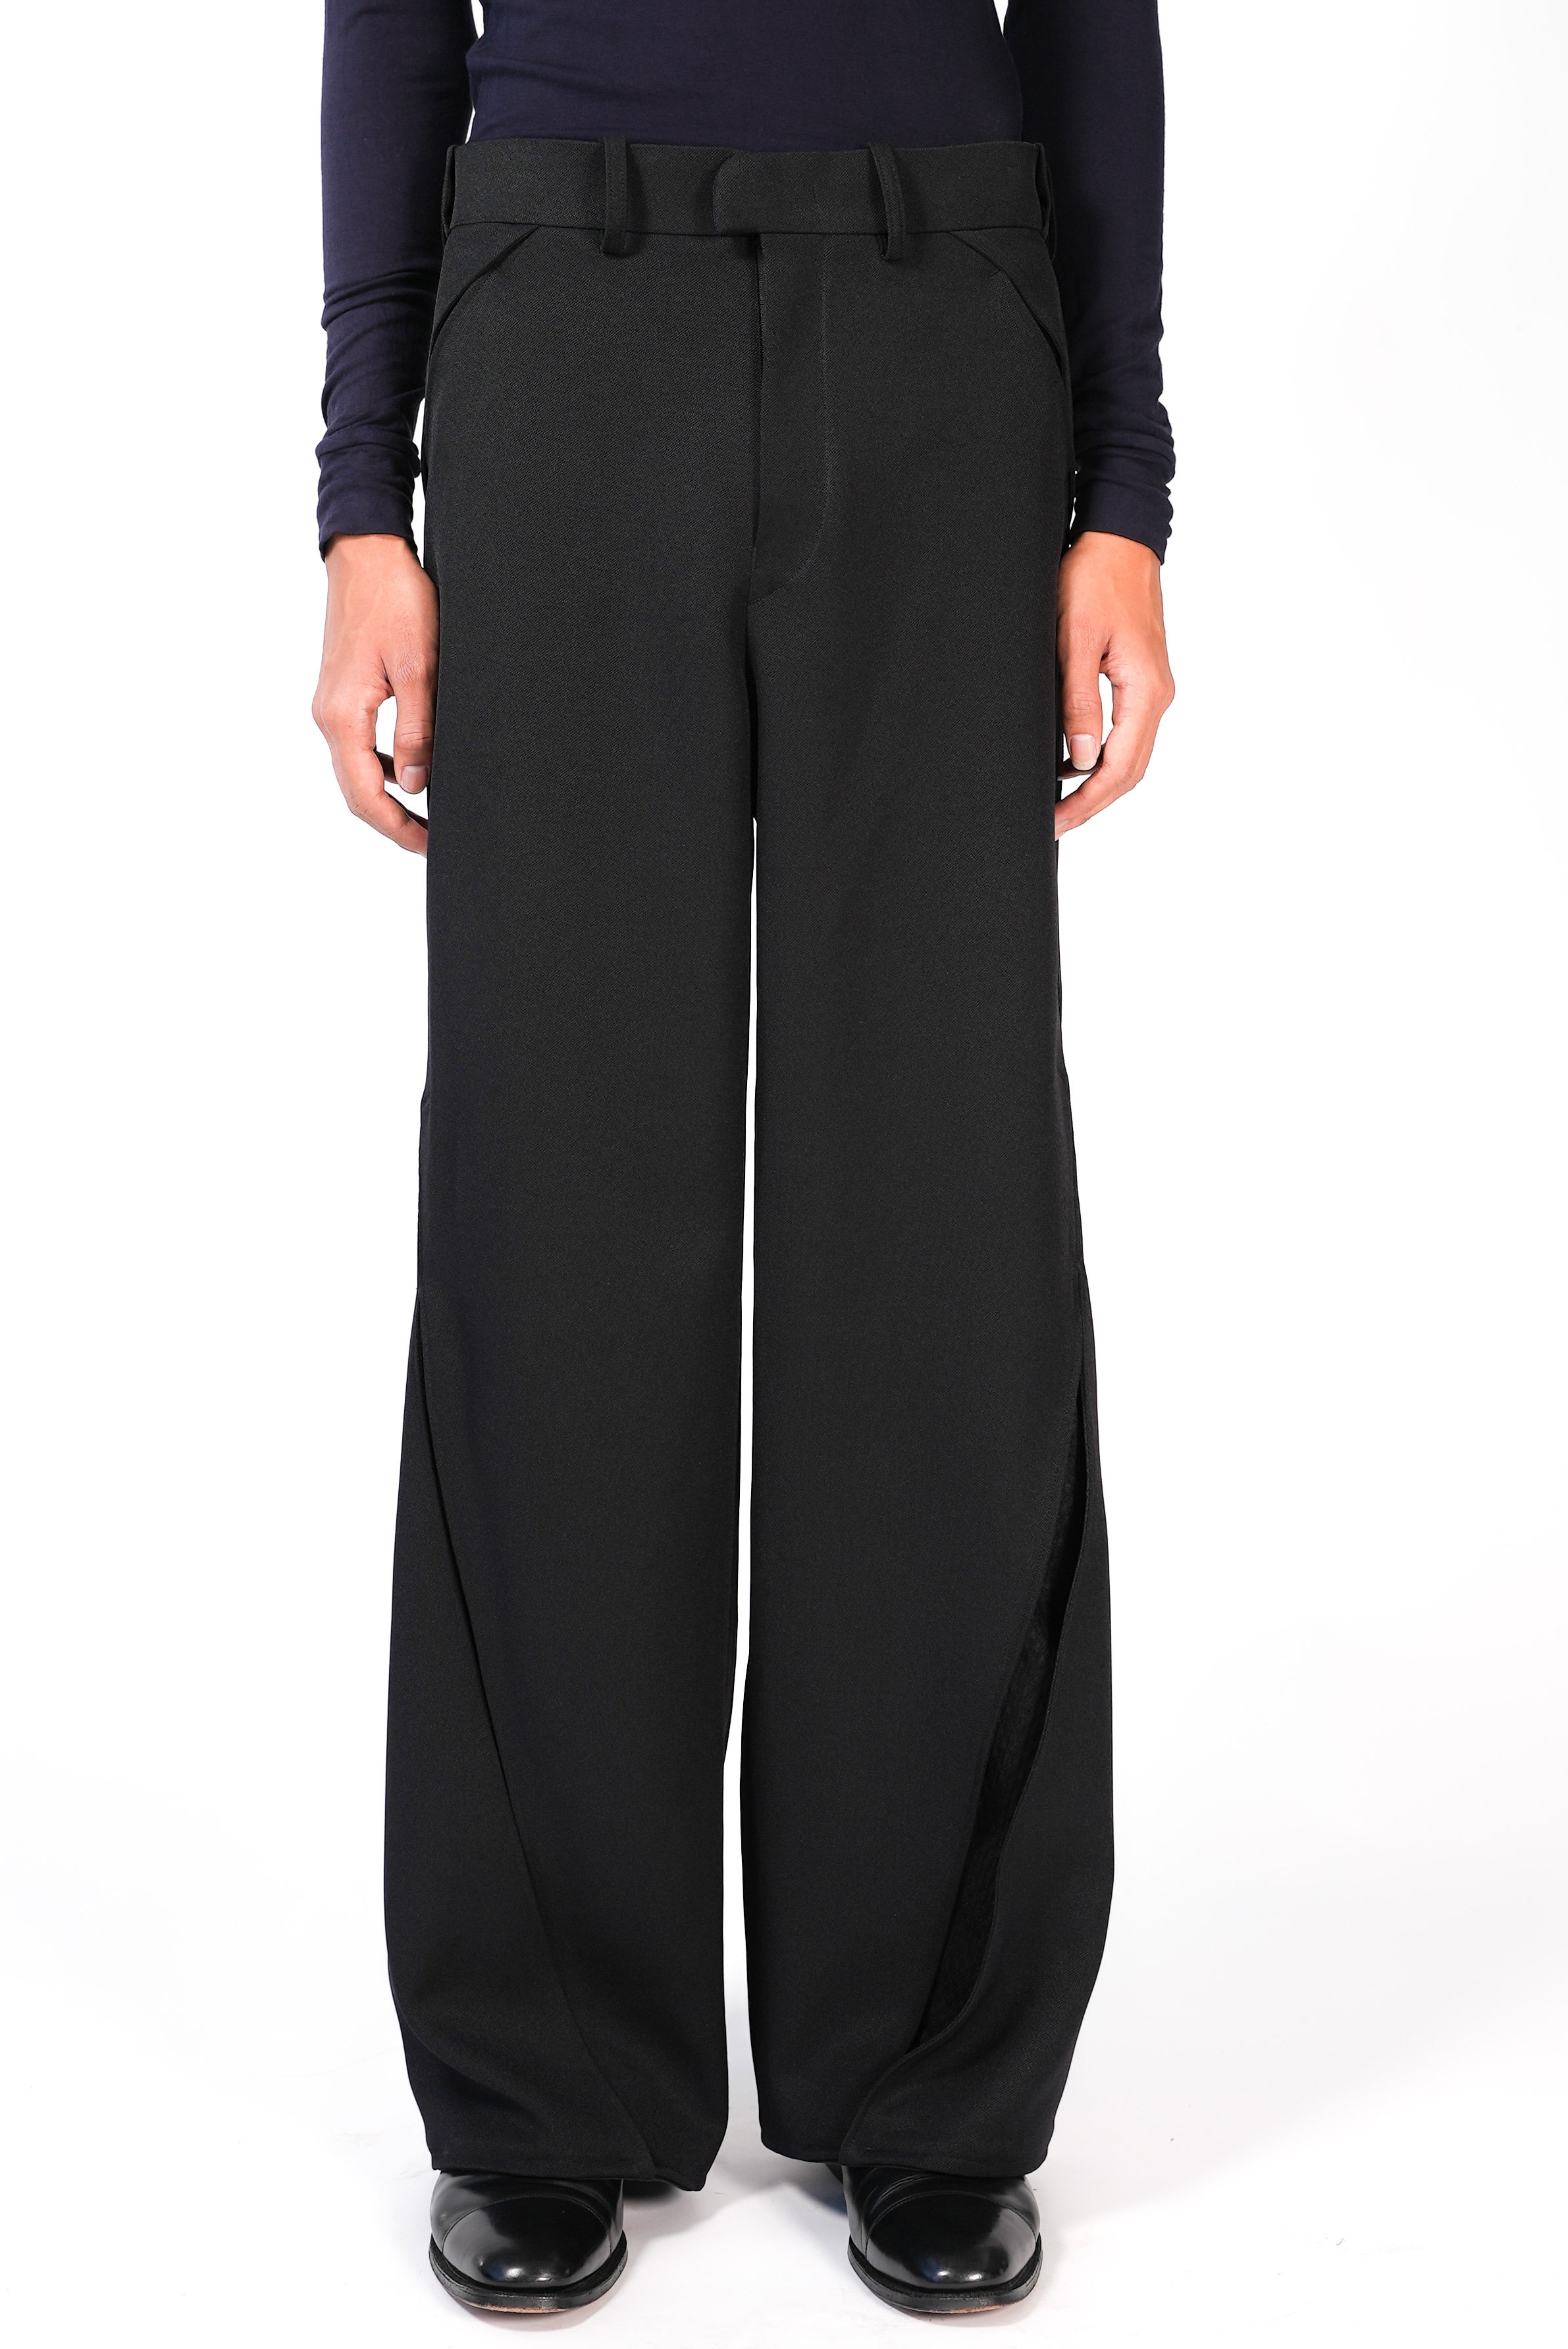 STRONG003 TROUSERS (BLACK) size:48 OUR‘s